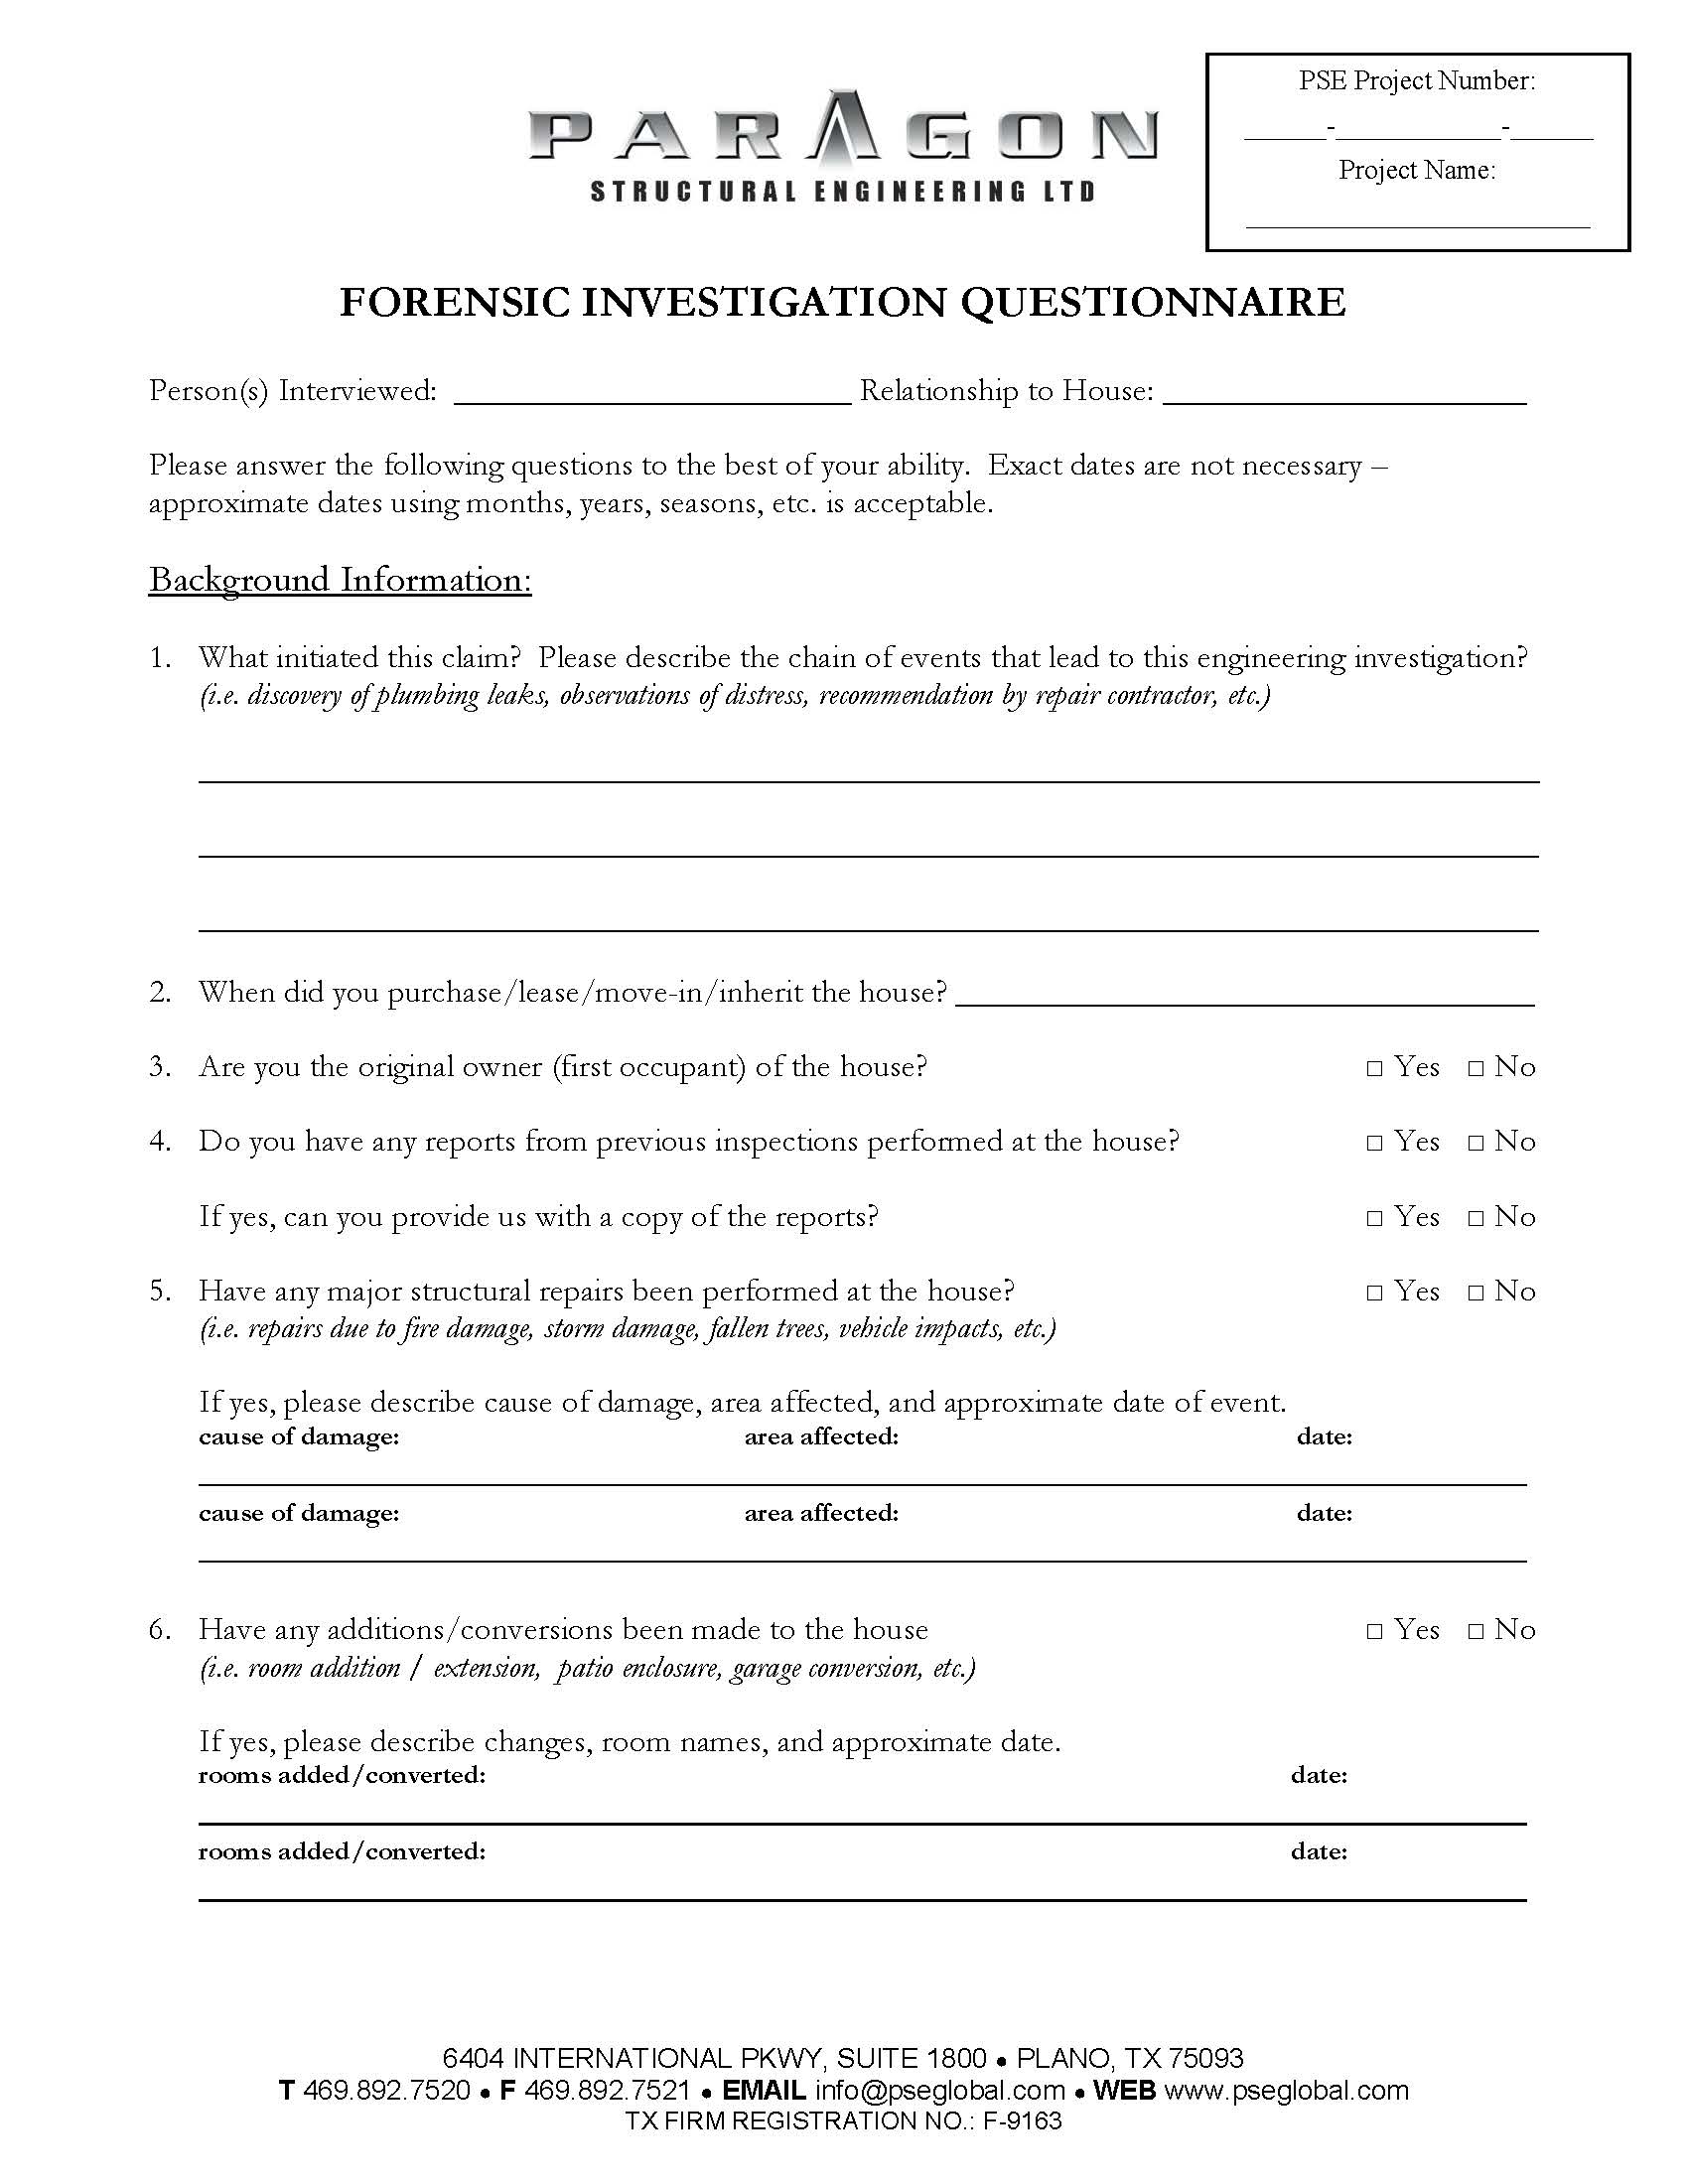 forensic investigation homeowner questionaire